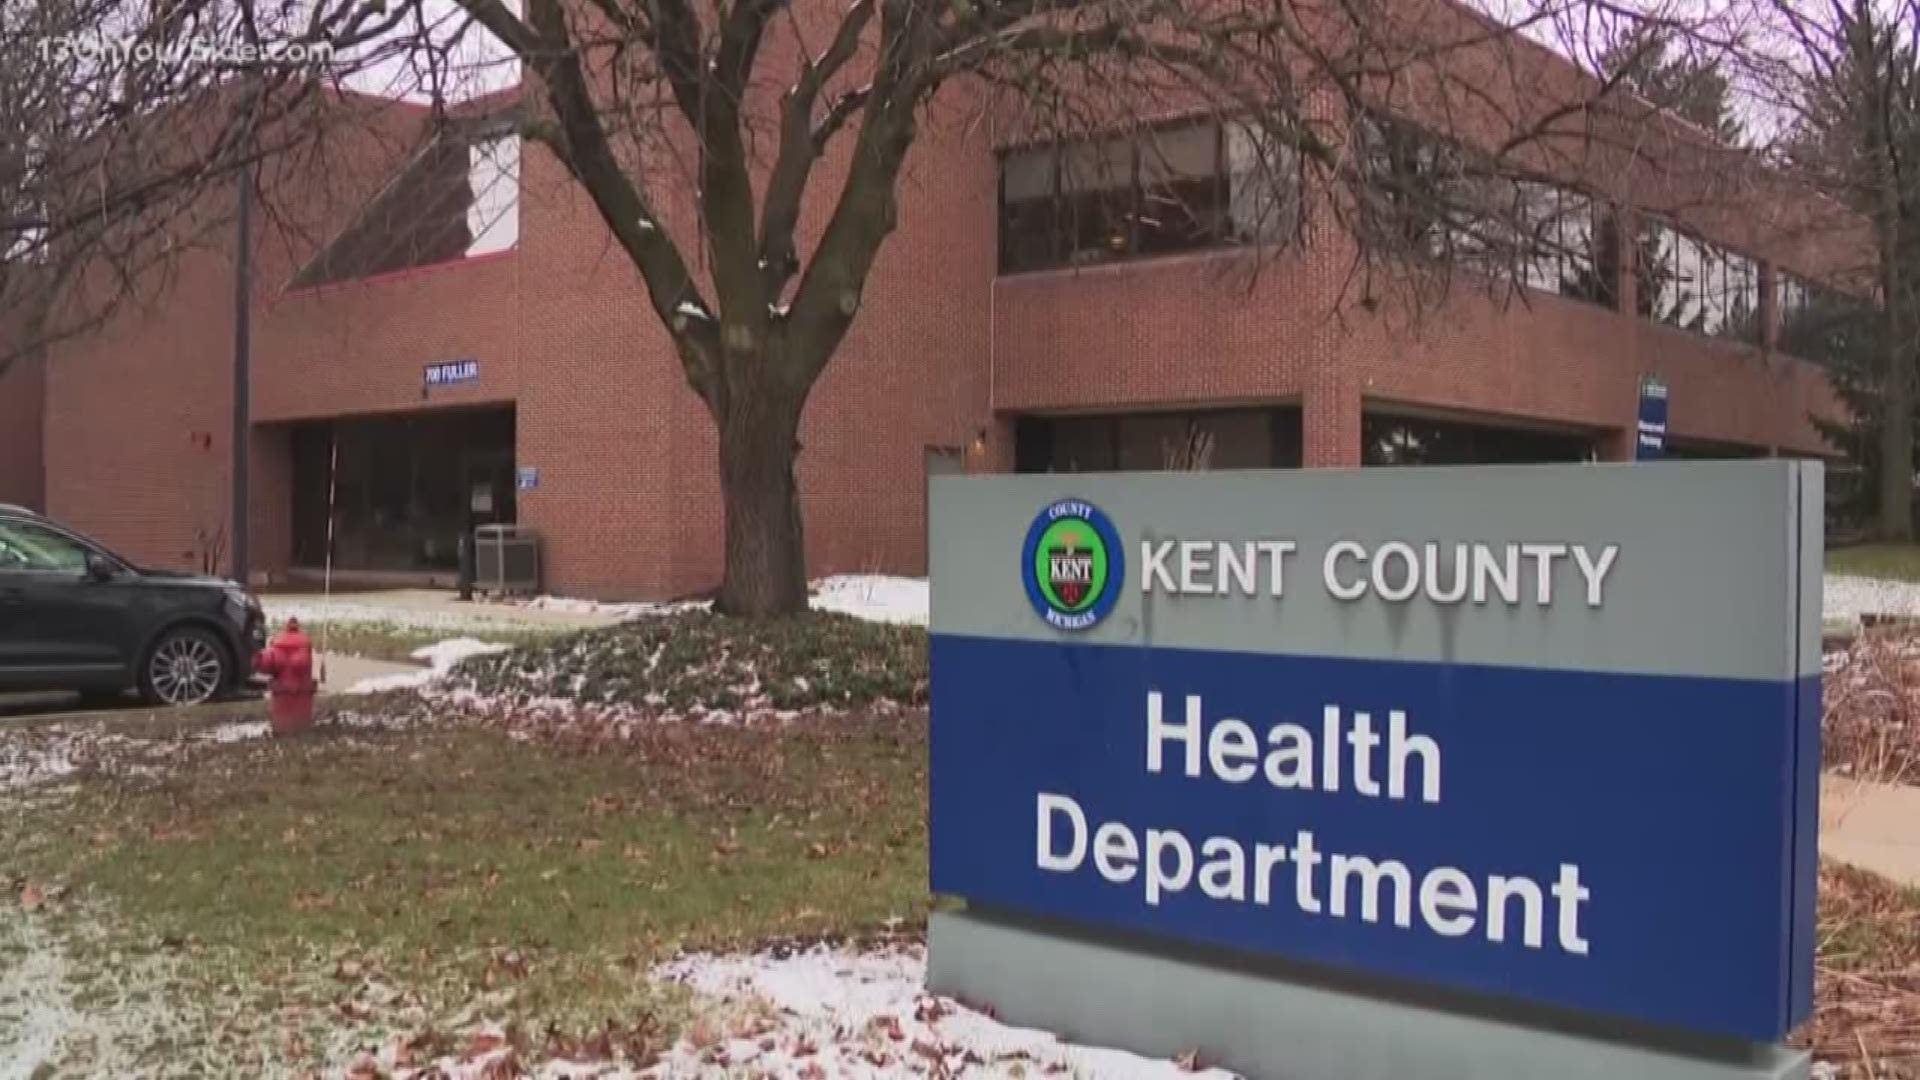 Health officials are providing daily updates on the COVID-19 situation in Kent County.